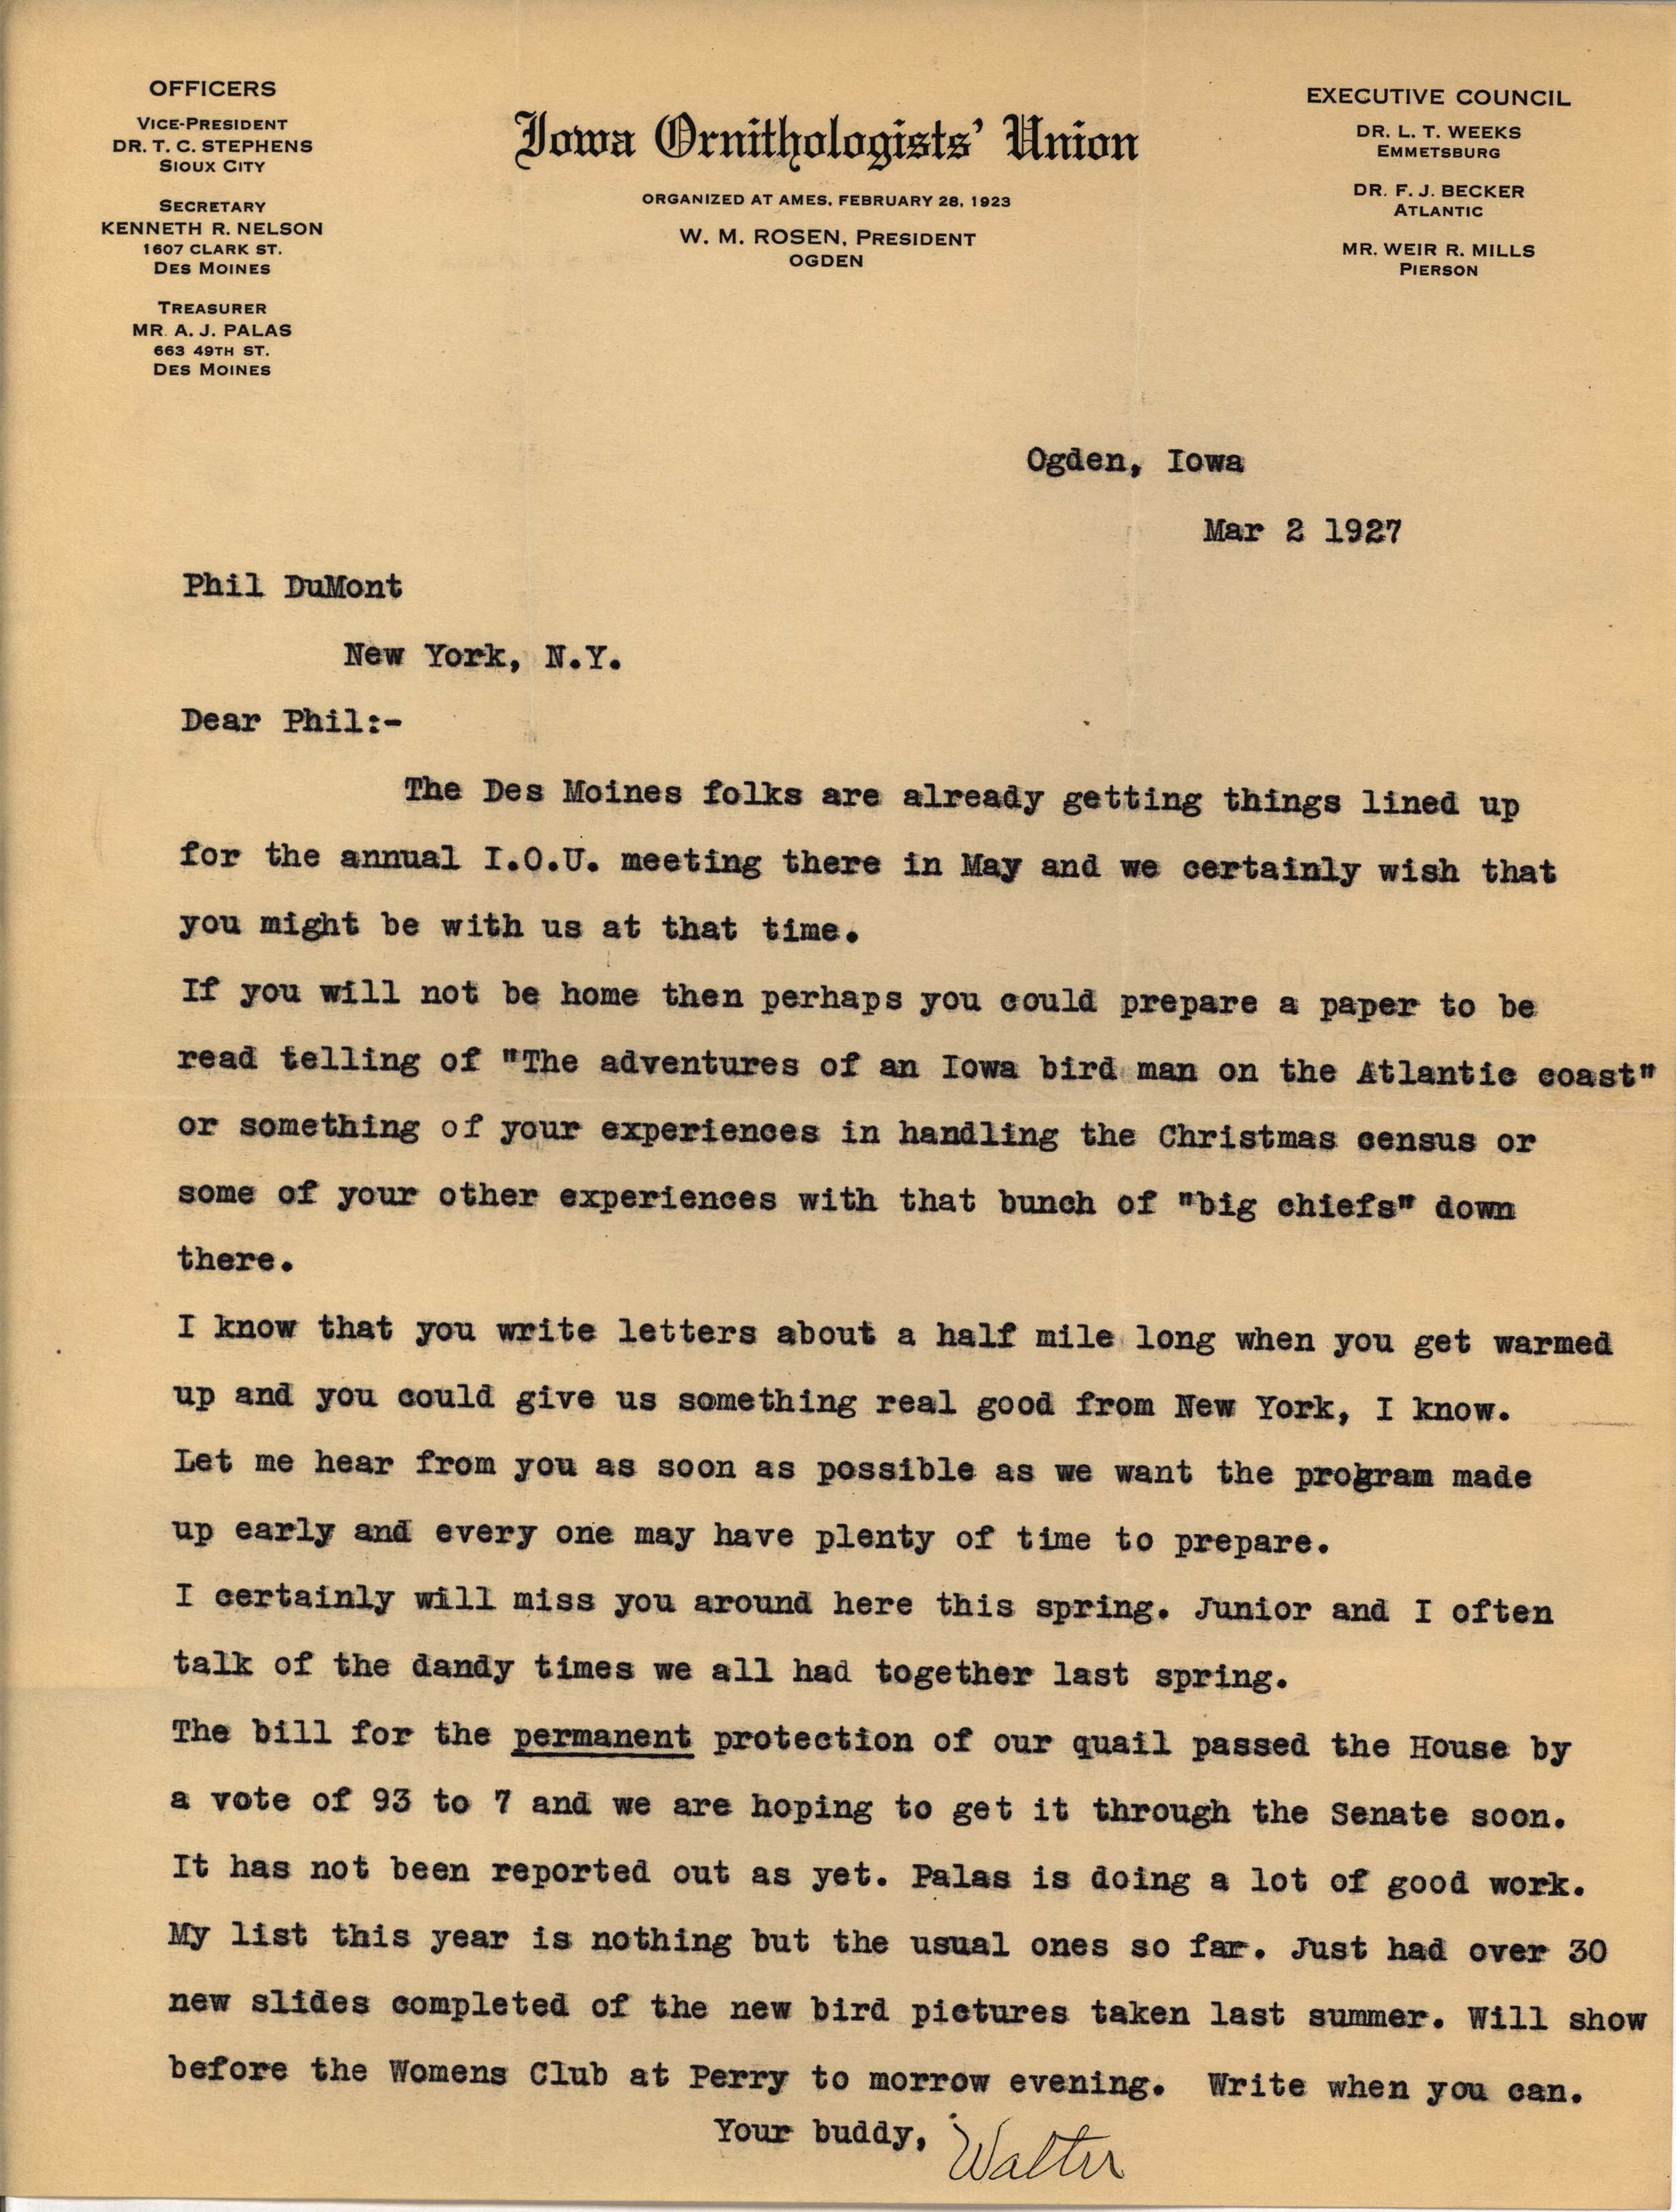 Walter Rosene letter to Philip DuMont regarding the annual Iowa Ornithologists' Union meeting, March 2, 1927